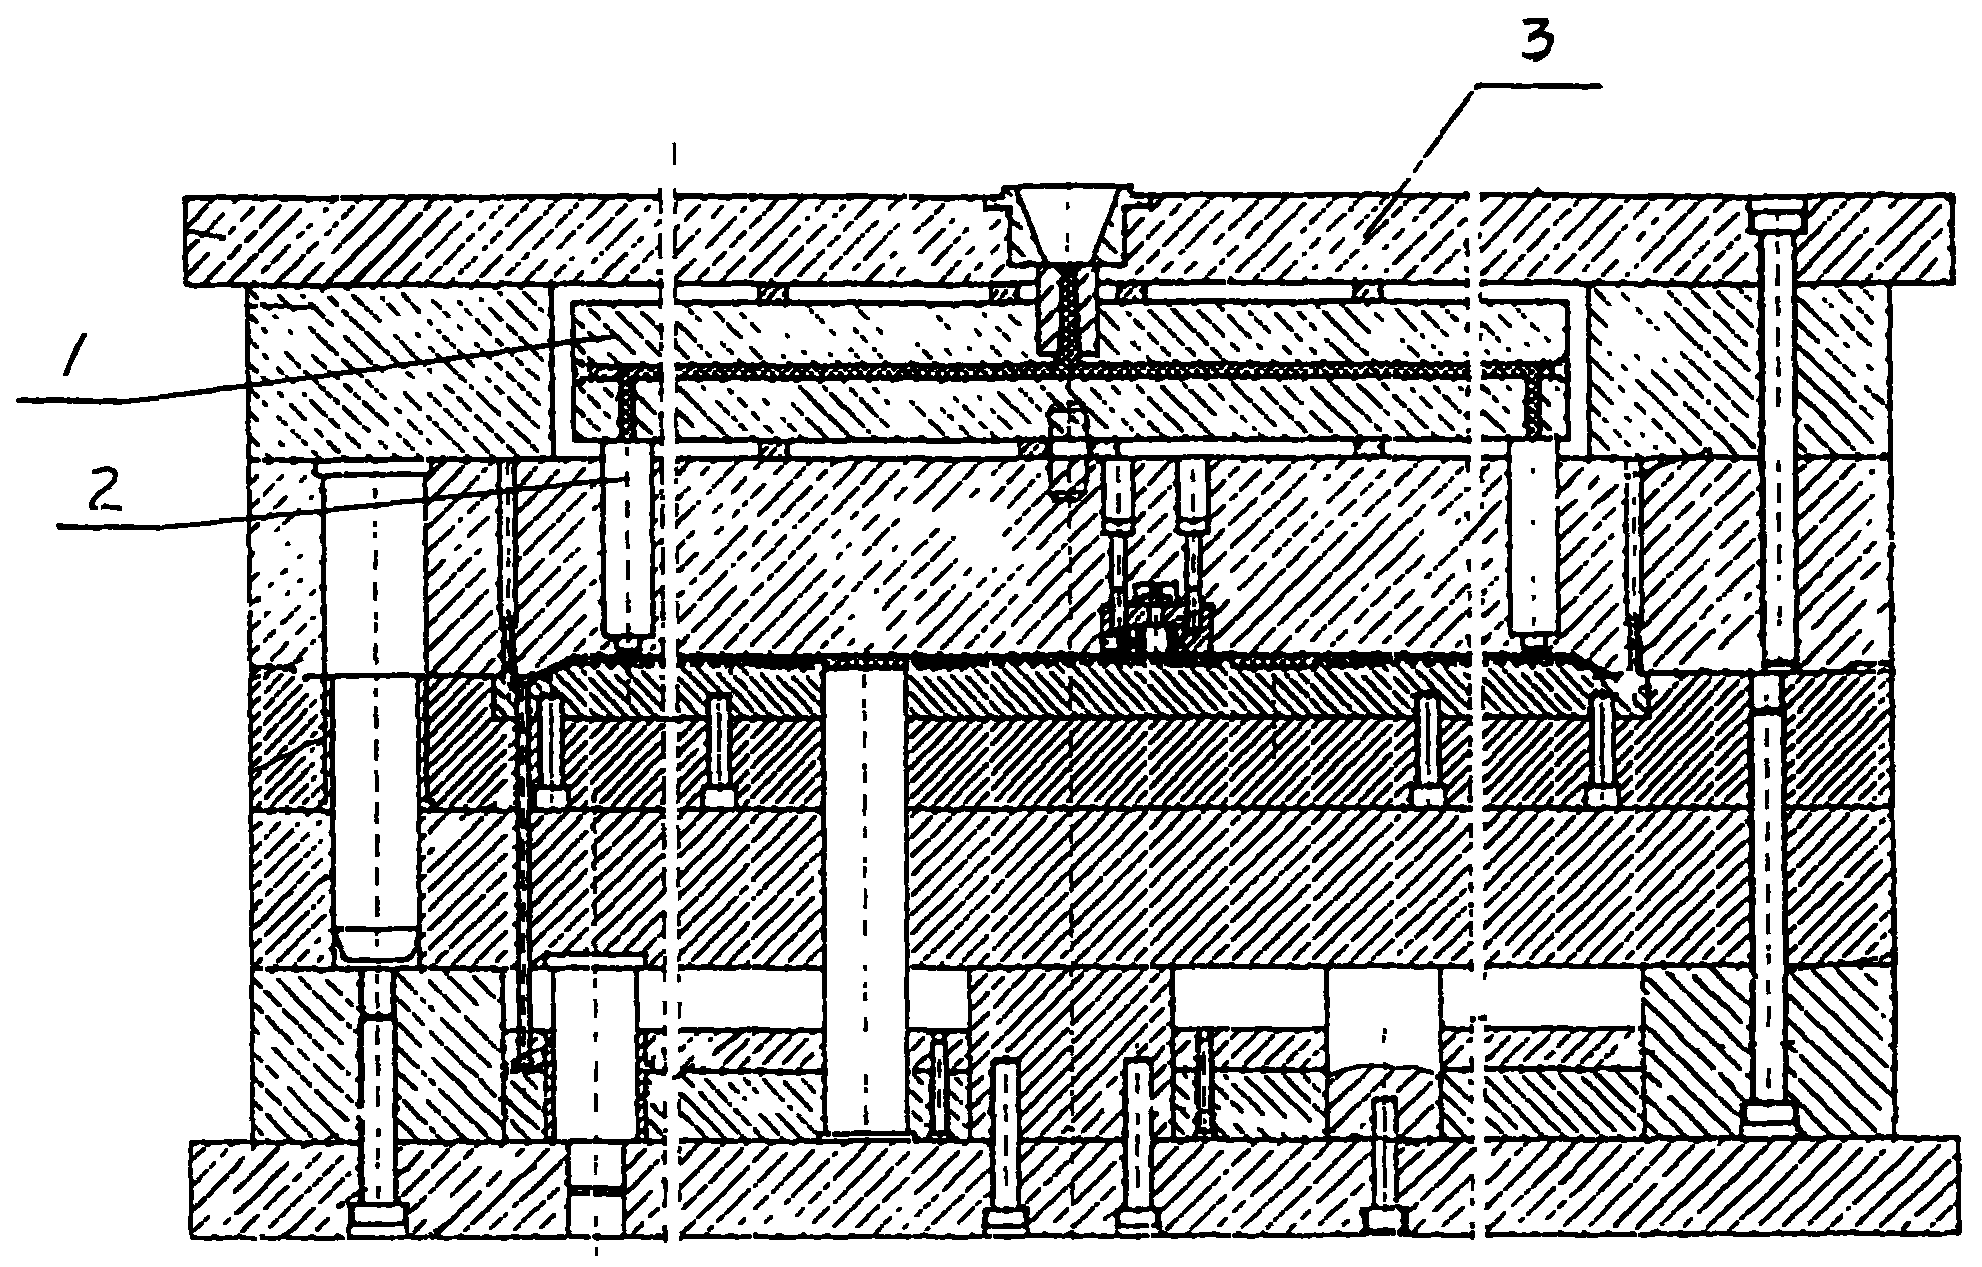 Injection moulding process and apparatus for plastic diaphragm of press filter